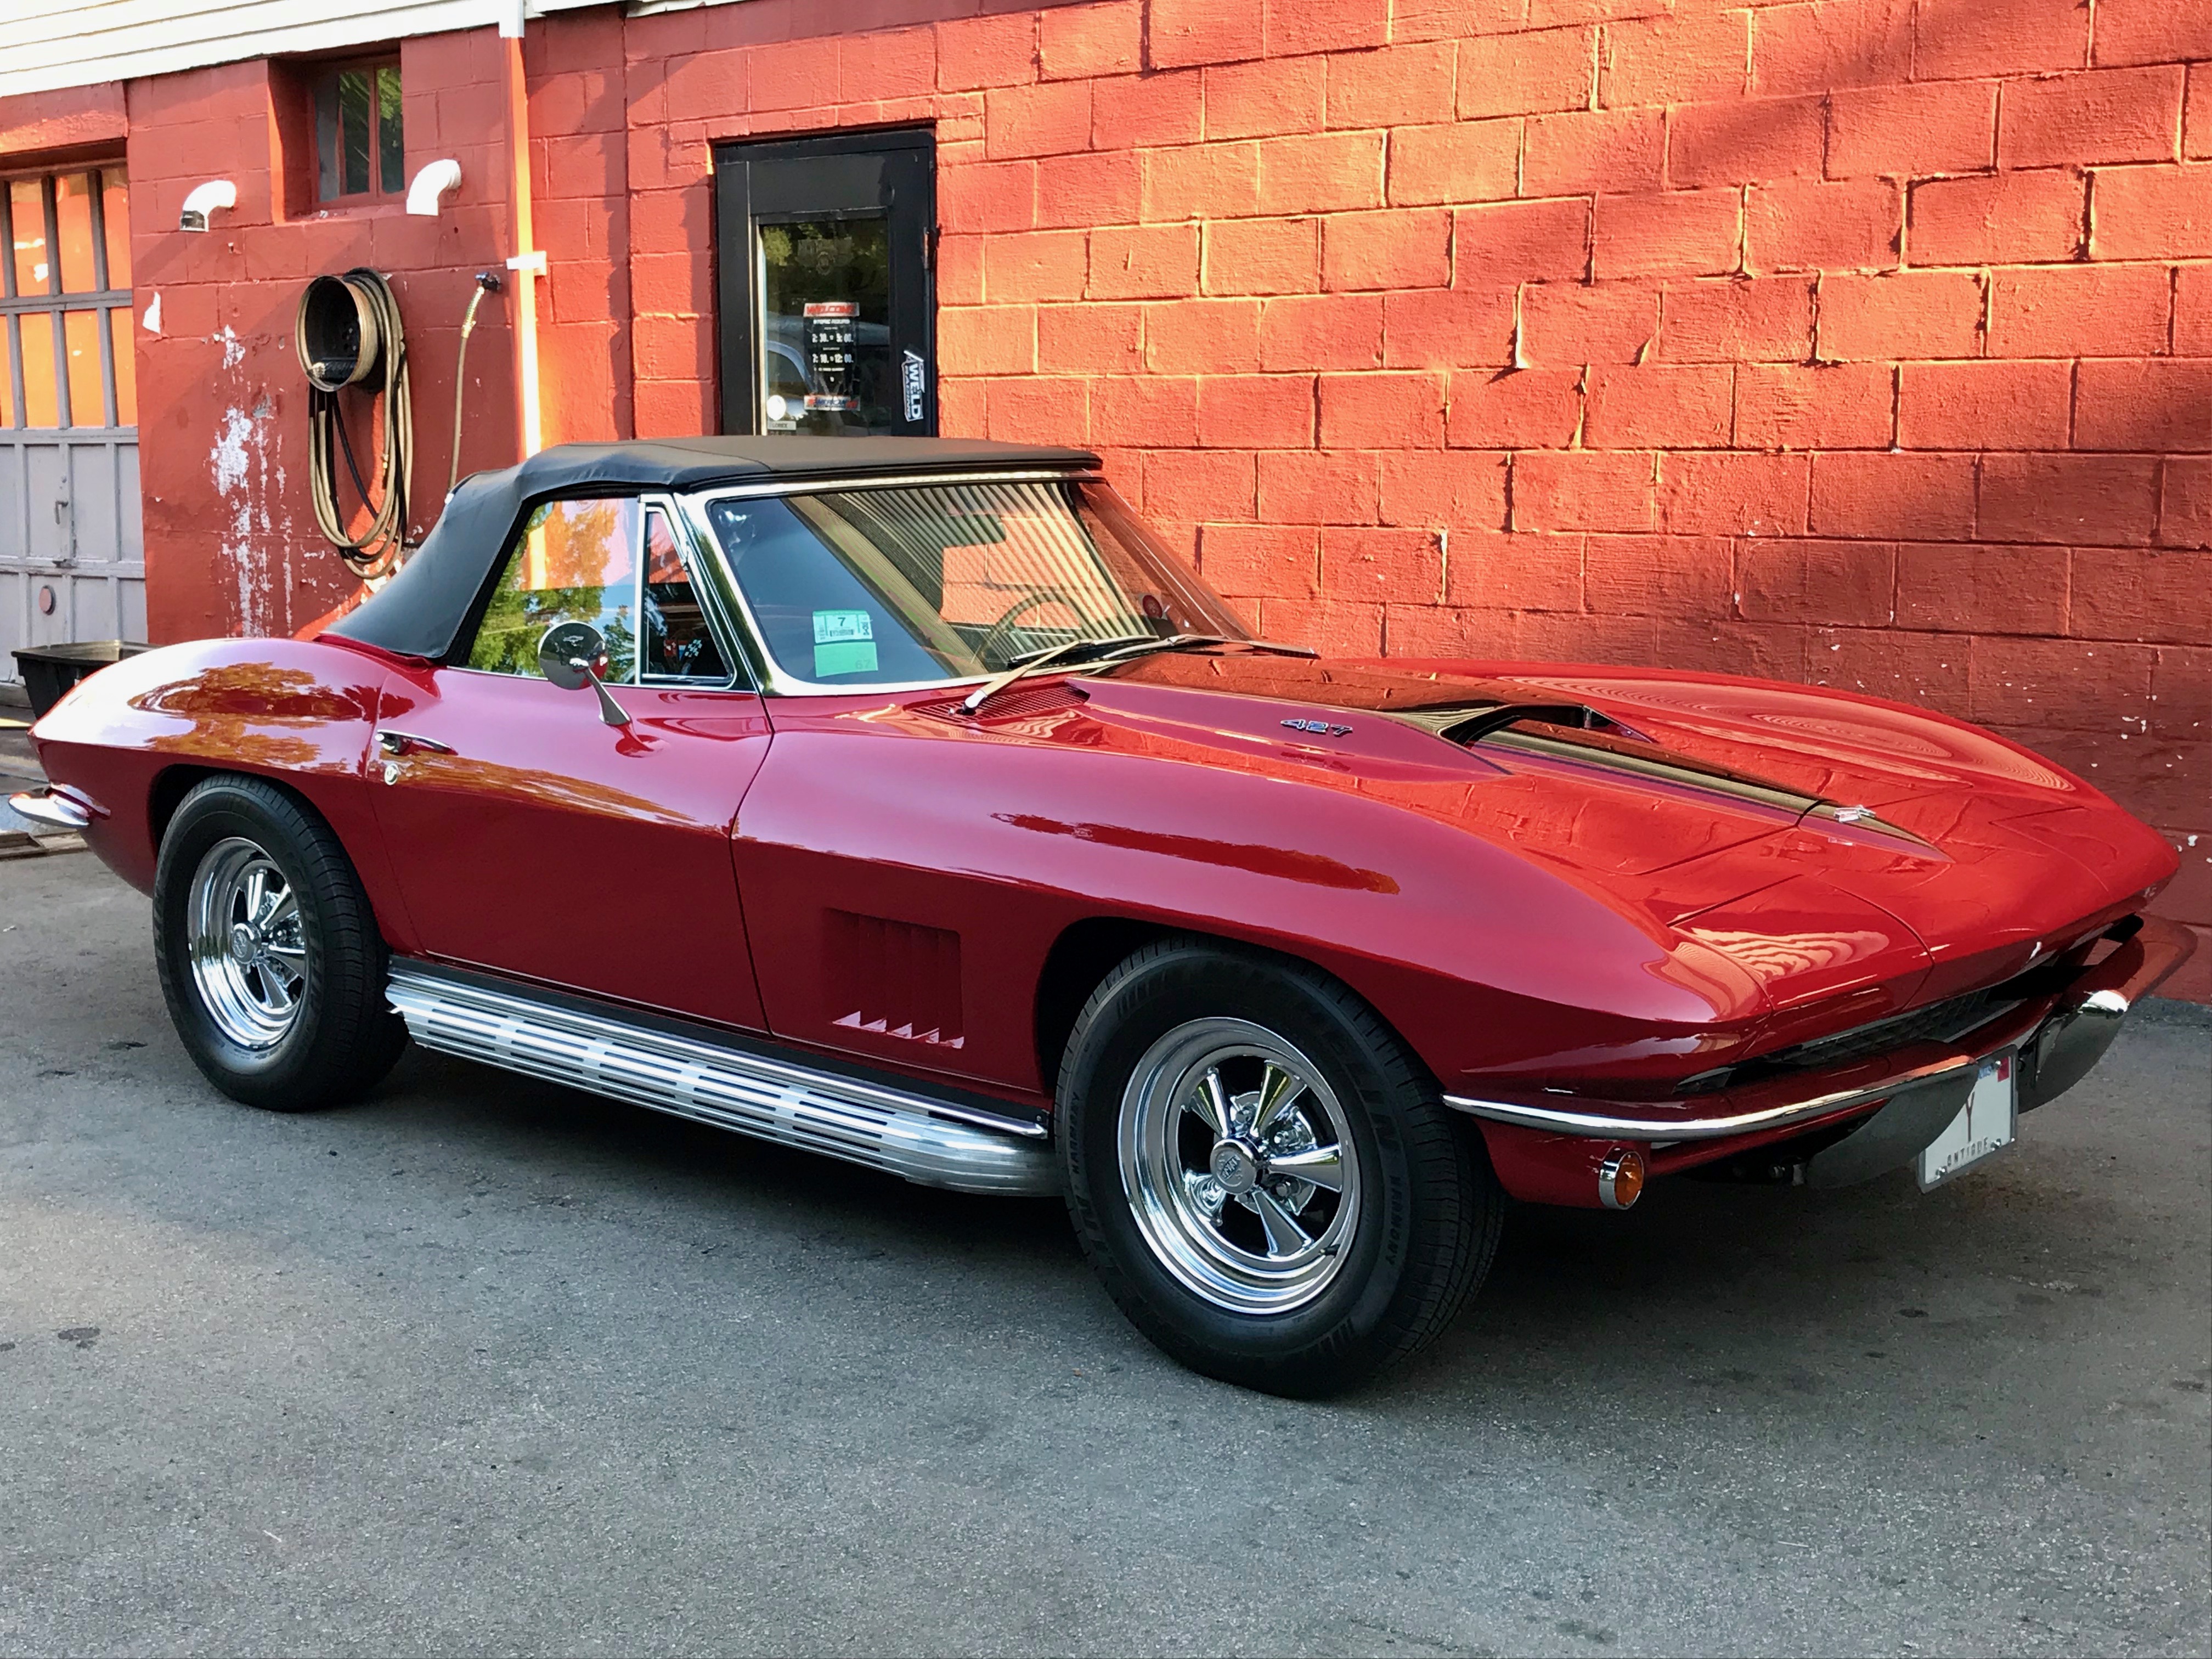 Find Tires & Alignment For Your Corvette